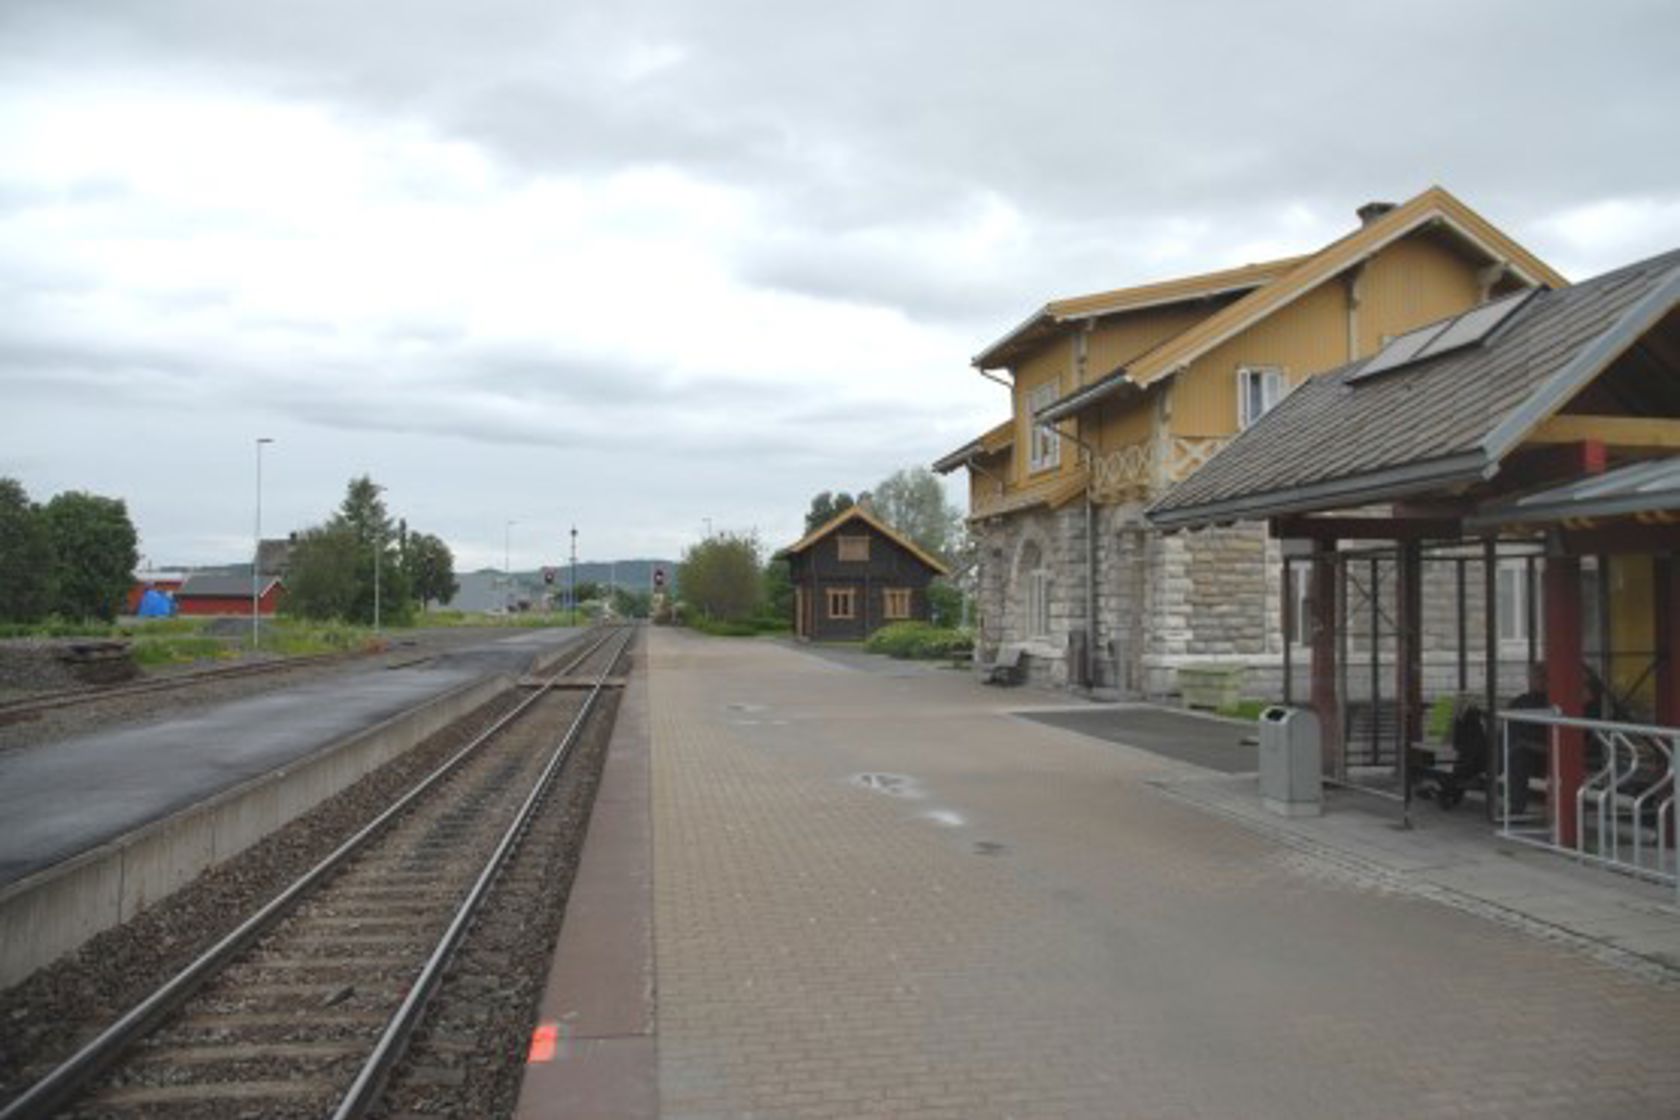 Exterior view of Skogn station